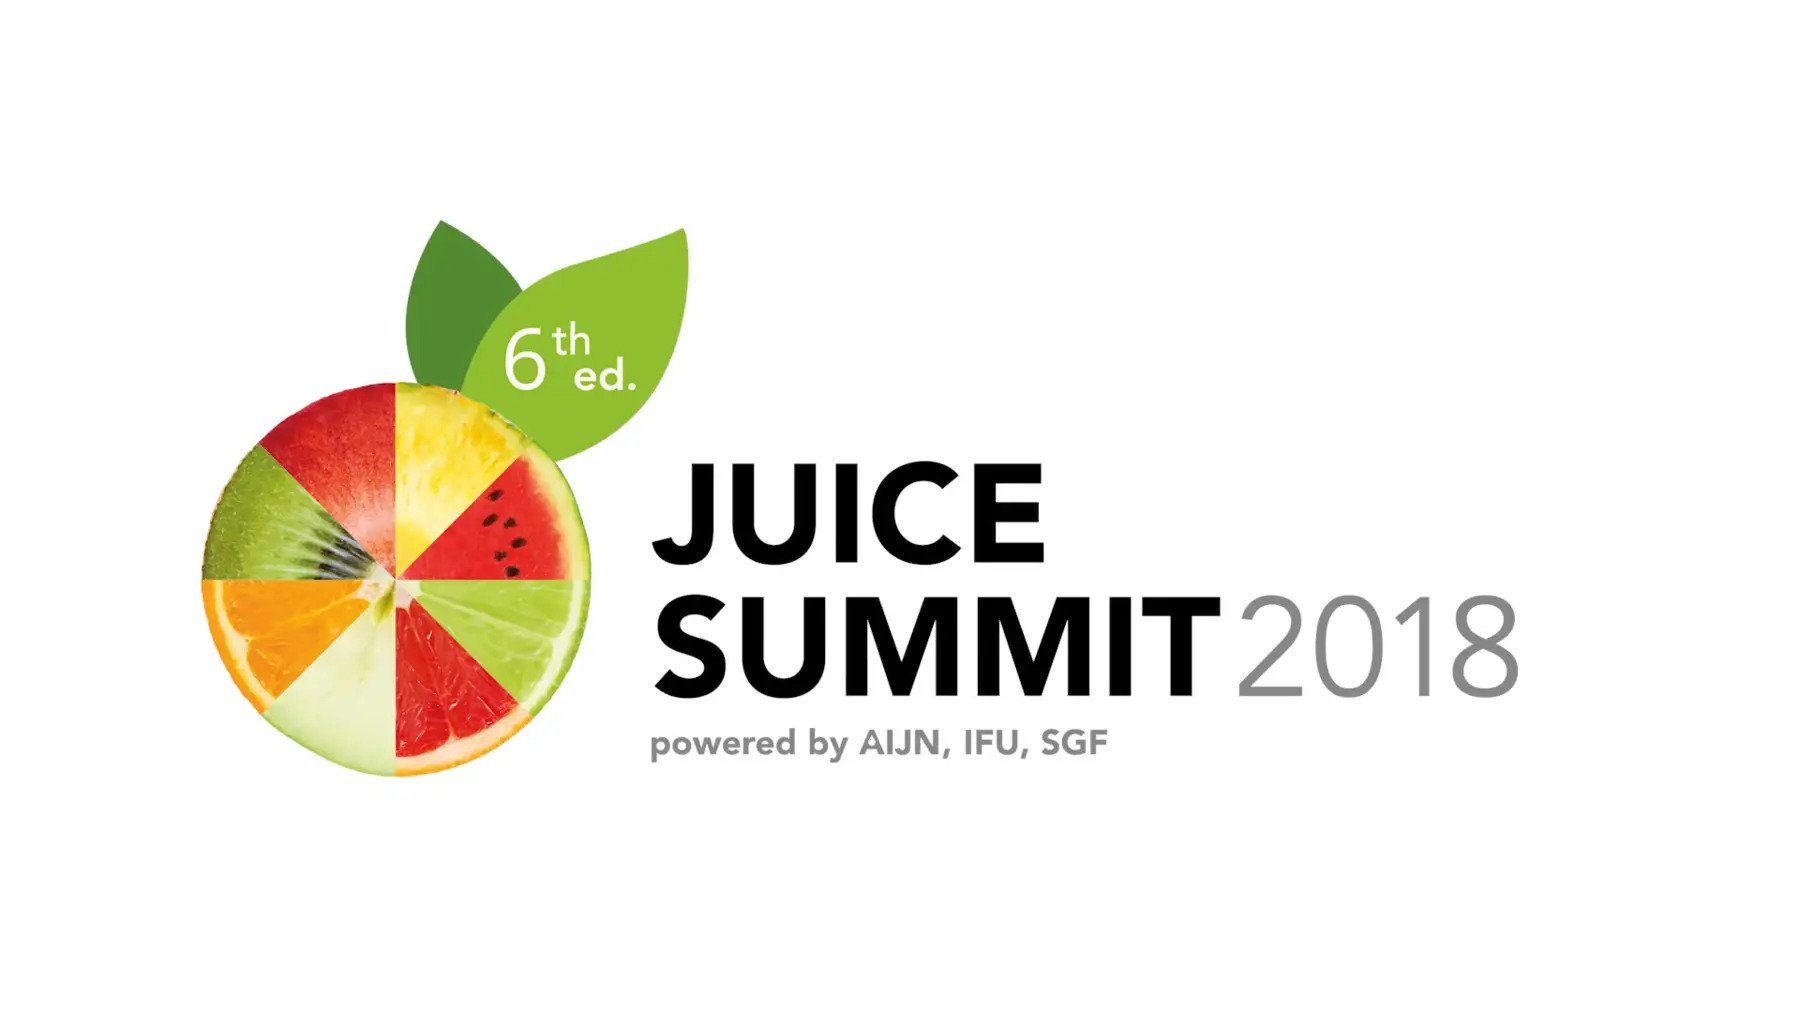 The logo for the Juice Summit 2018